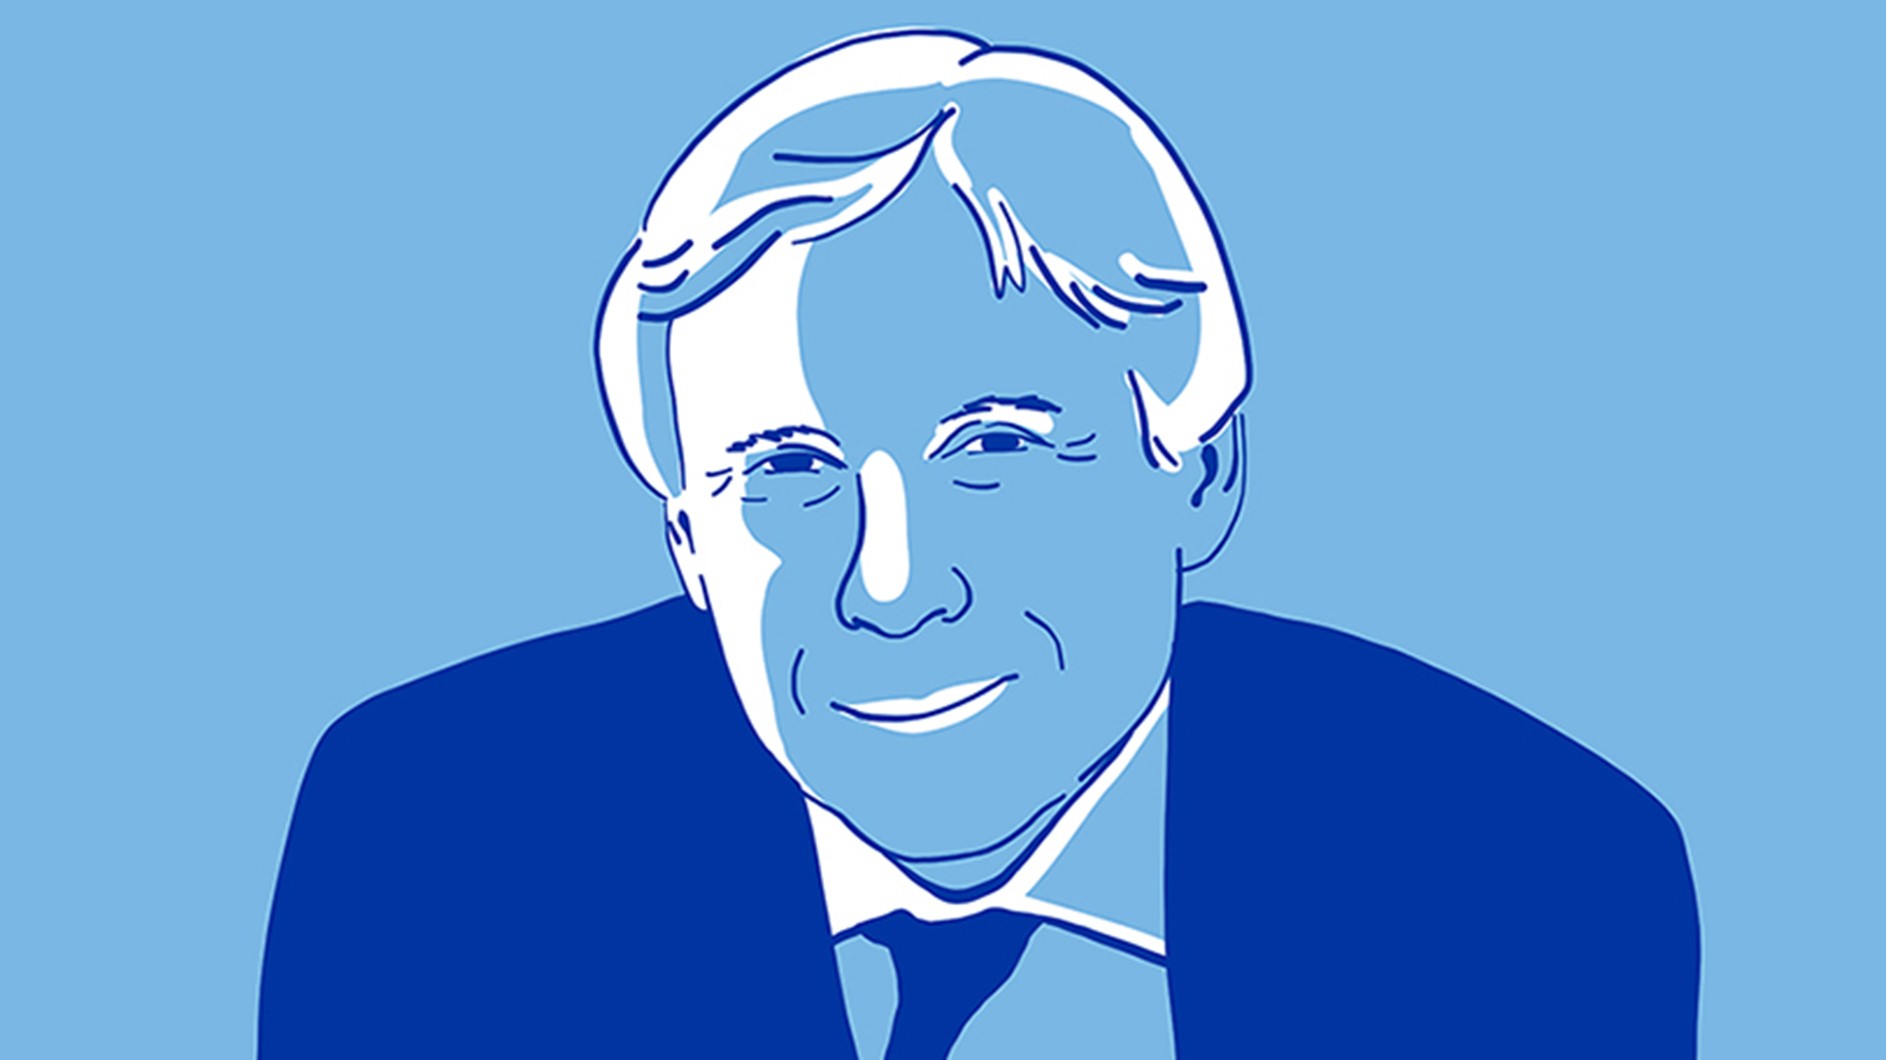 An illustration of a man in a blue suit with white hair. 